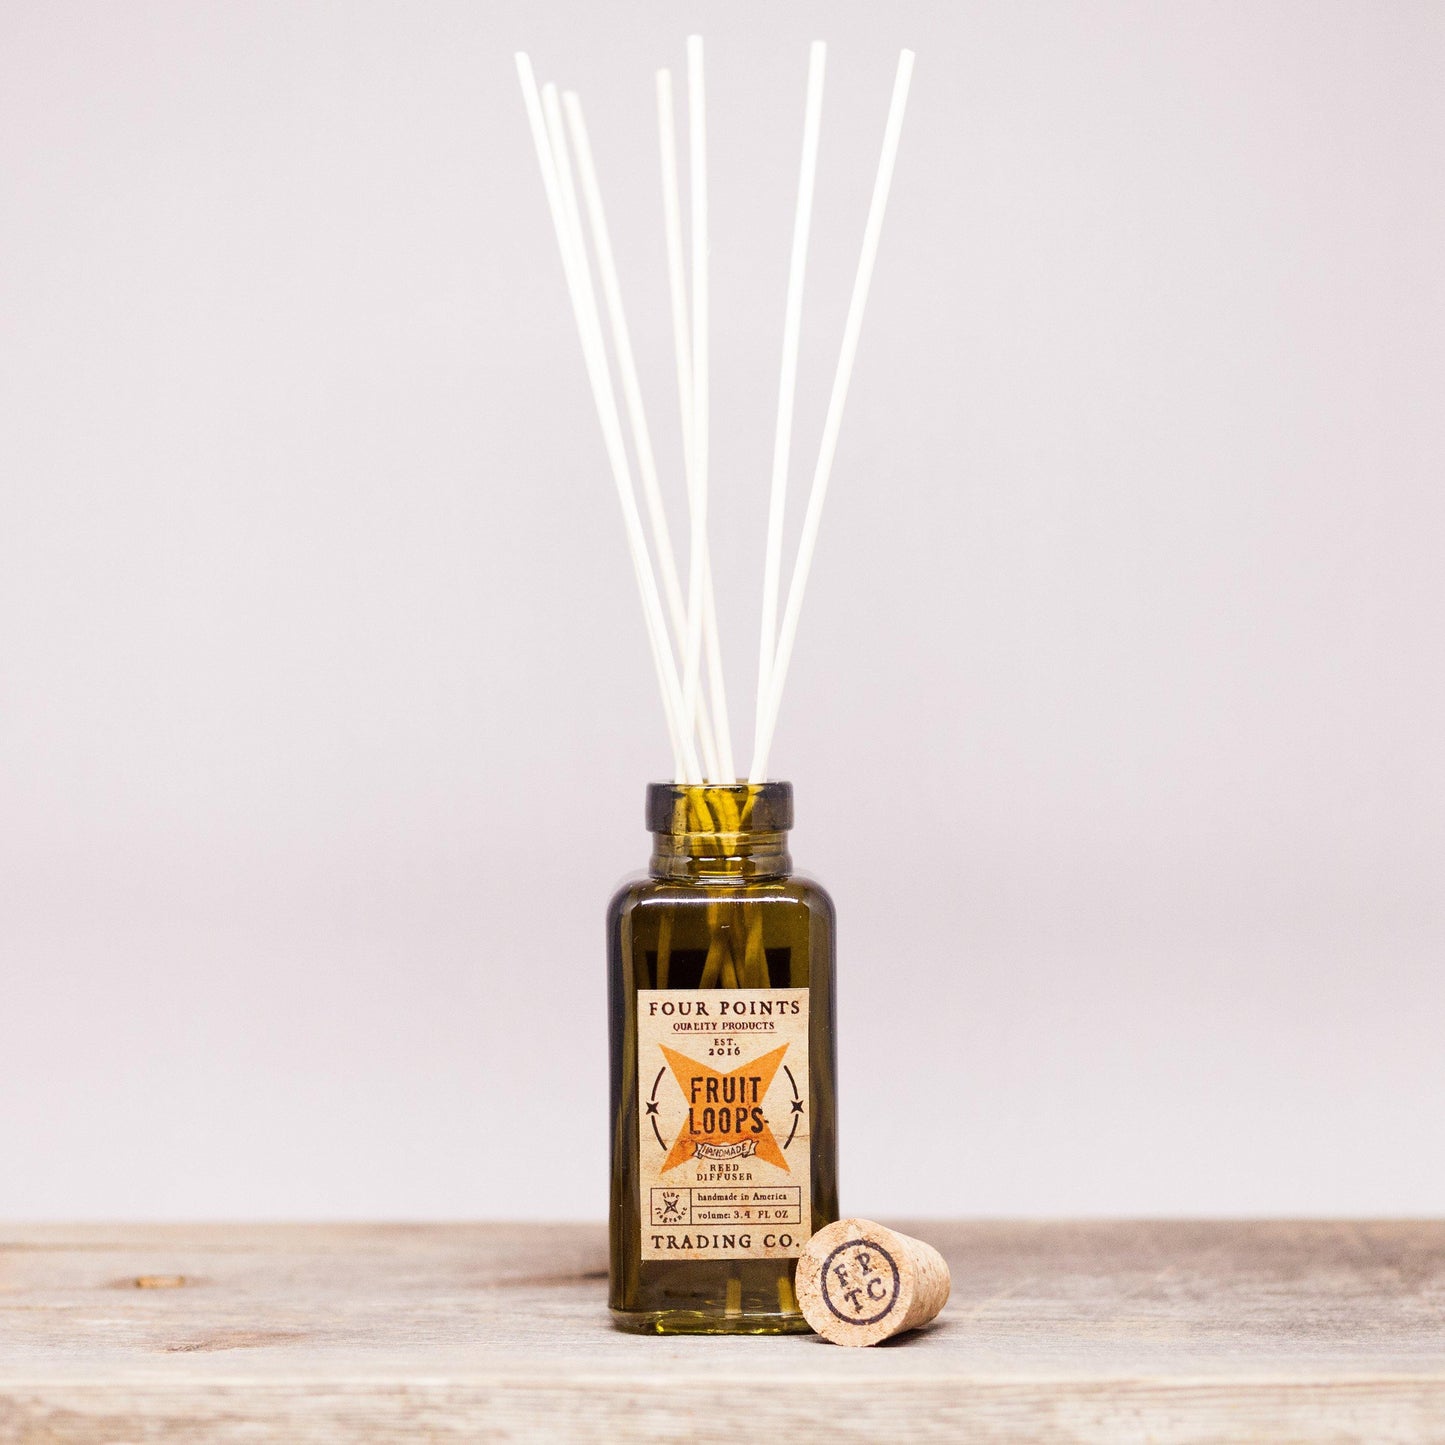 Fruit Loops 3.4oz reed Diffuser by Four Points Trading Co.